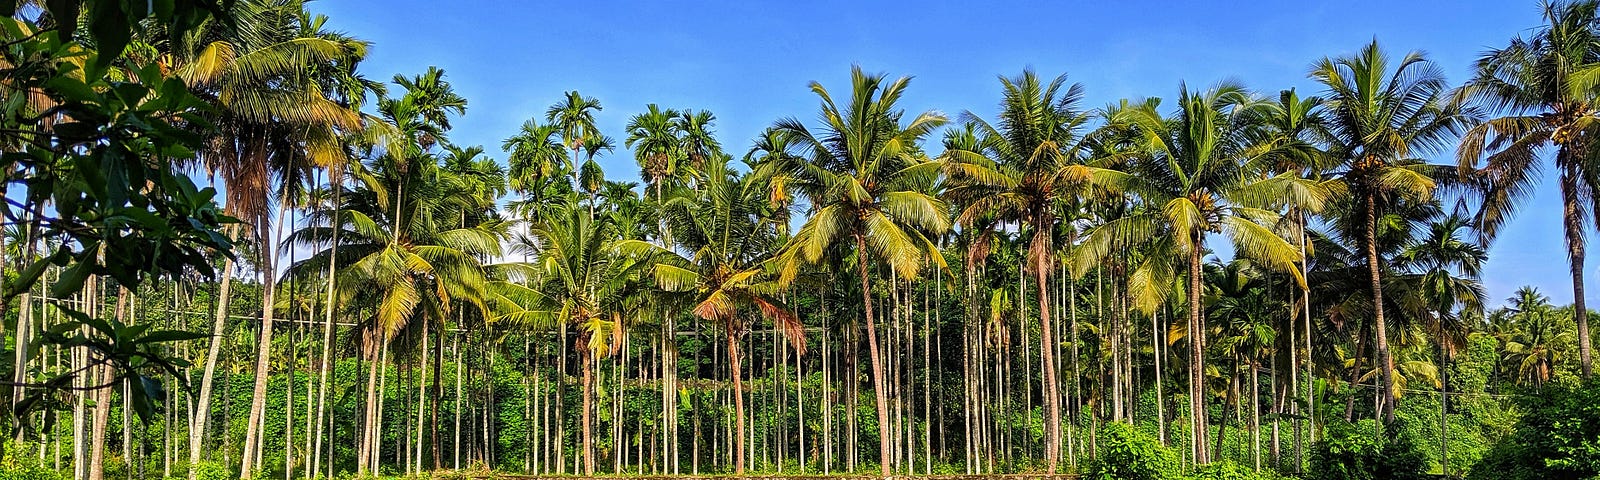 A pond surrounded by a lush grove of palm trees under a bright blue sky